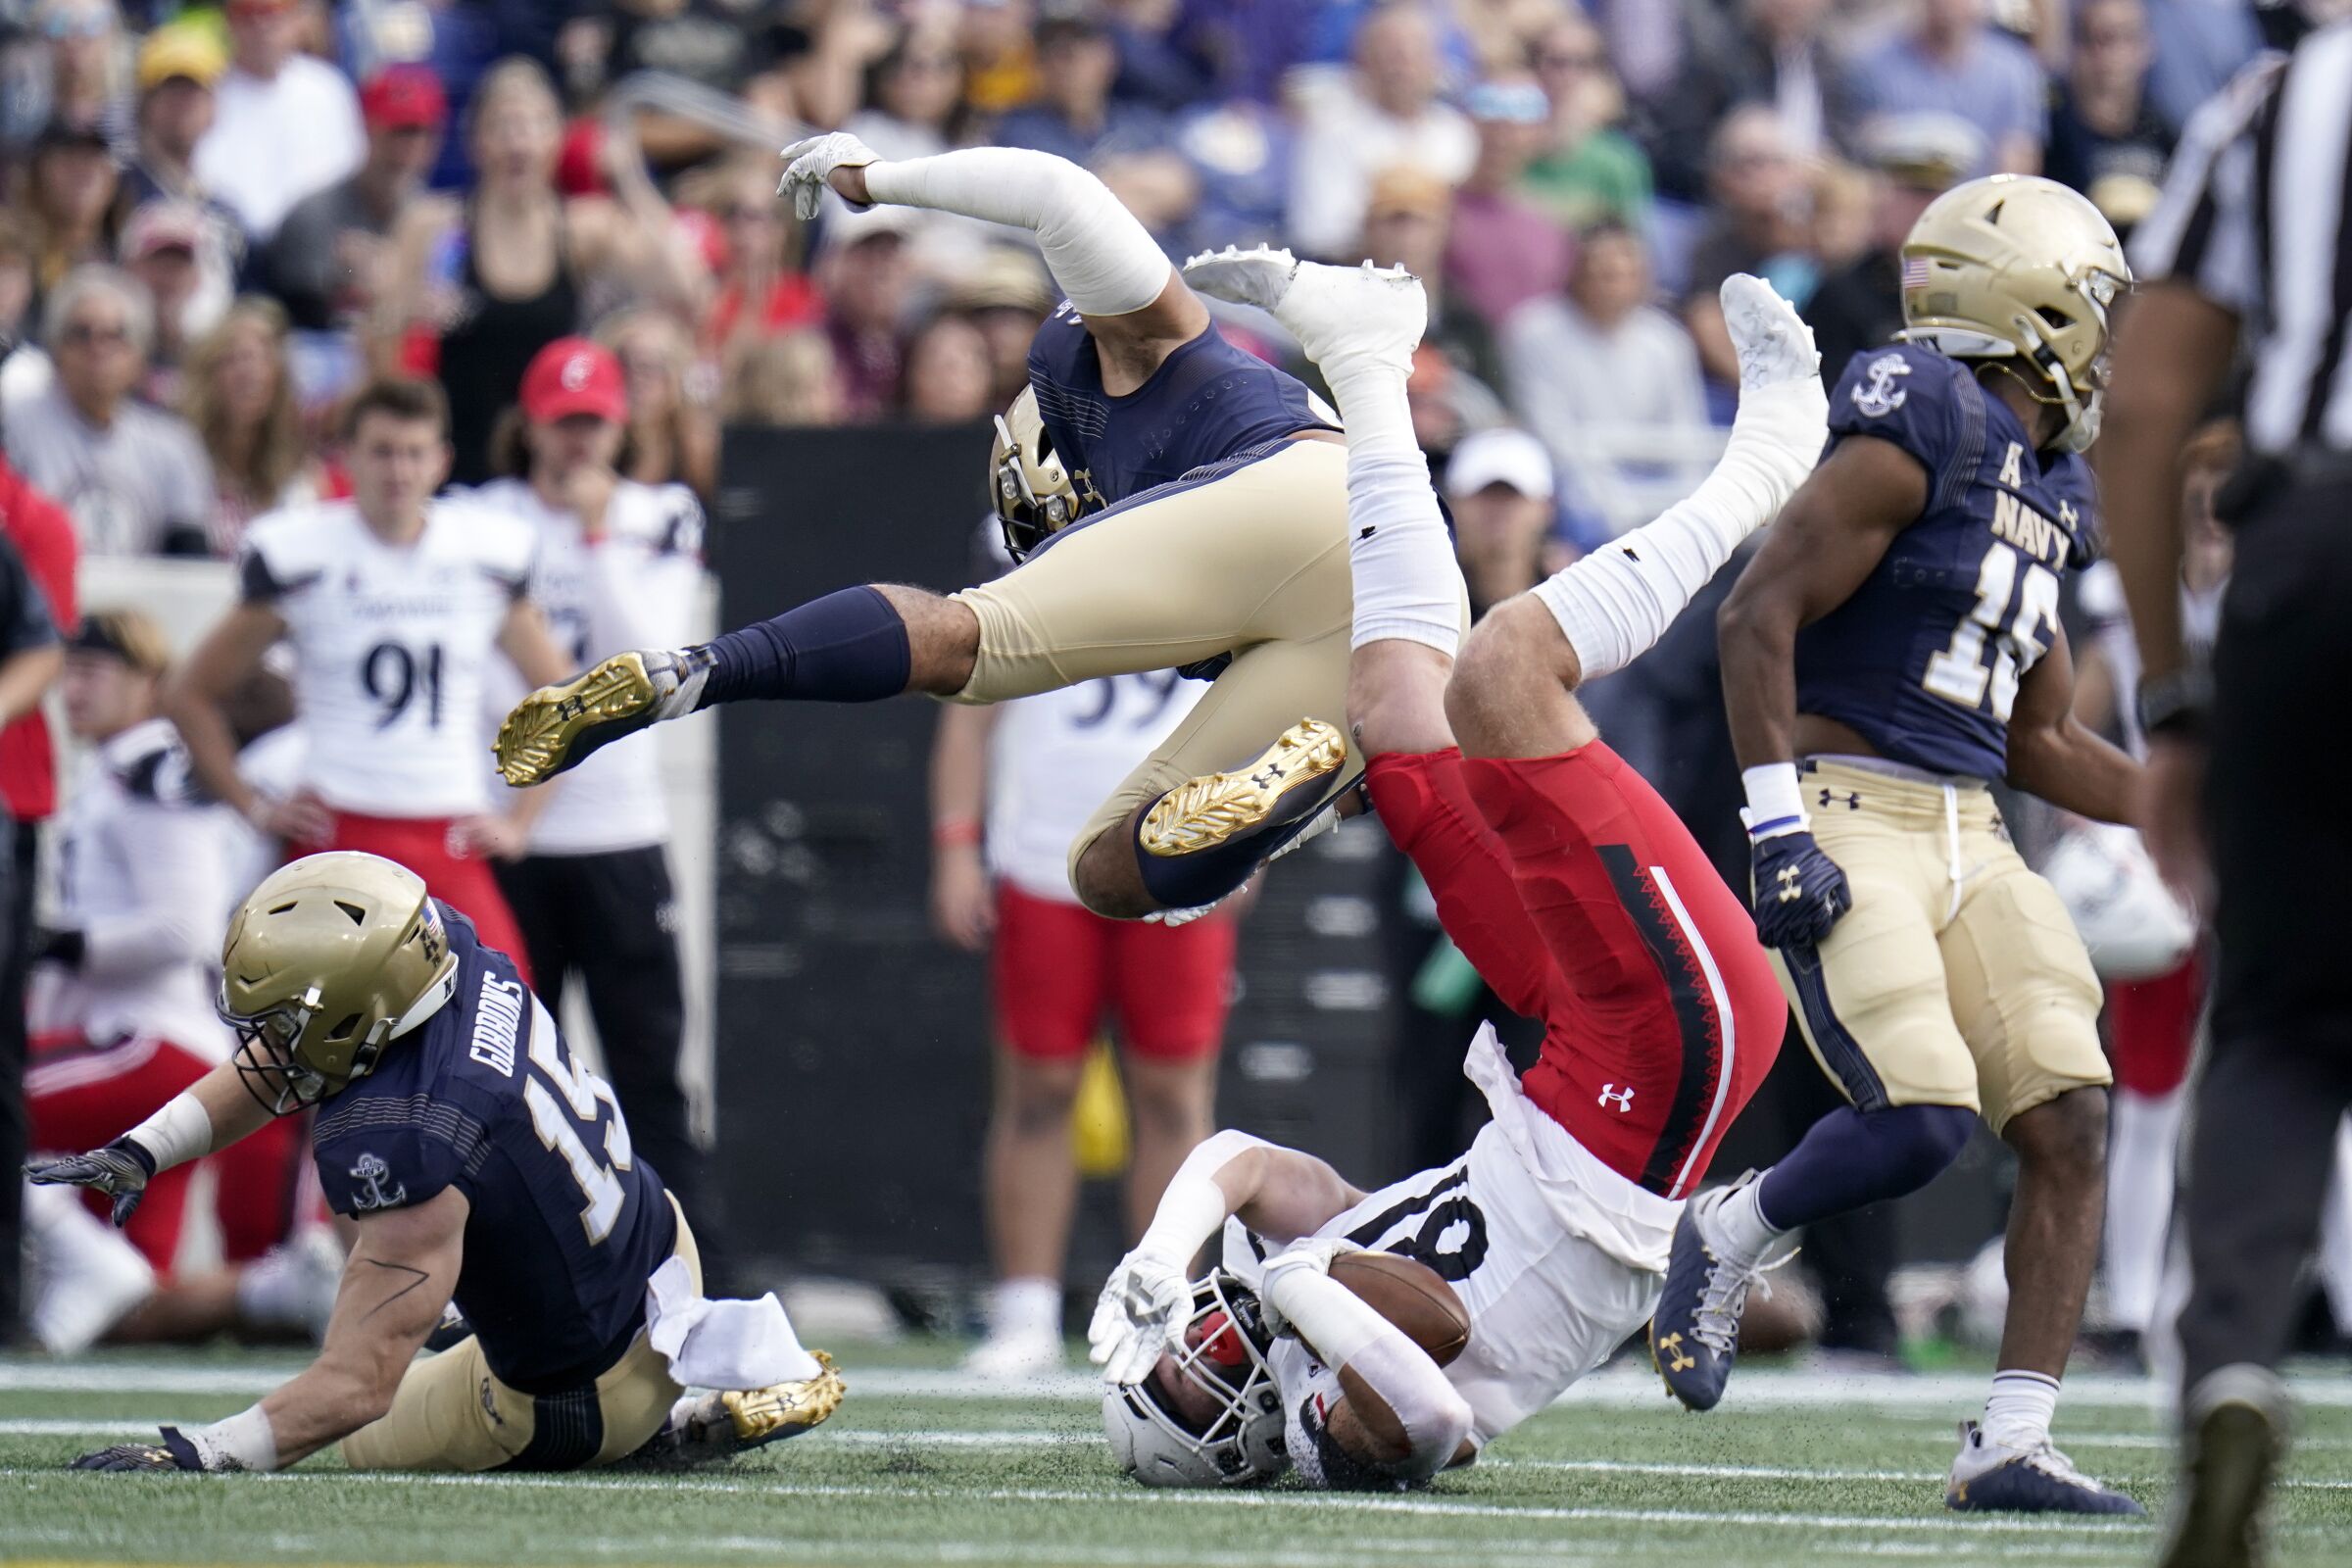 Navy linebacker Nicholas Straw, top, upends Cincinnati tight end Josh Whyle while making a tackle.